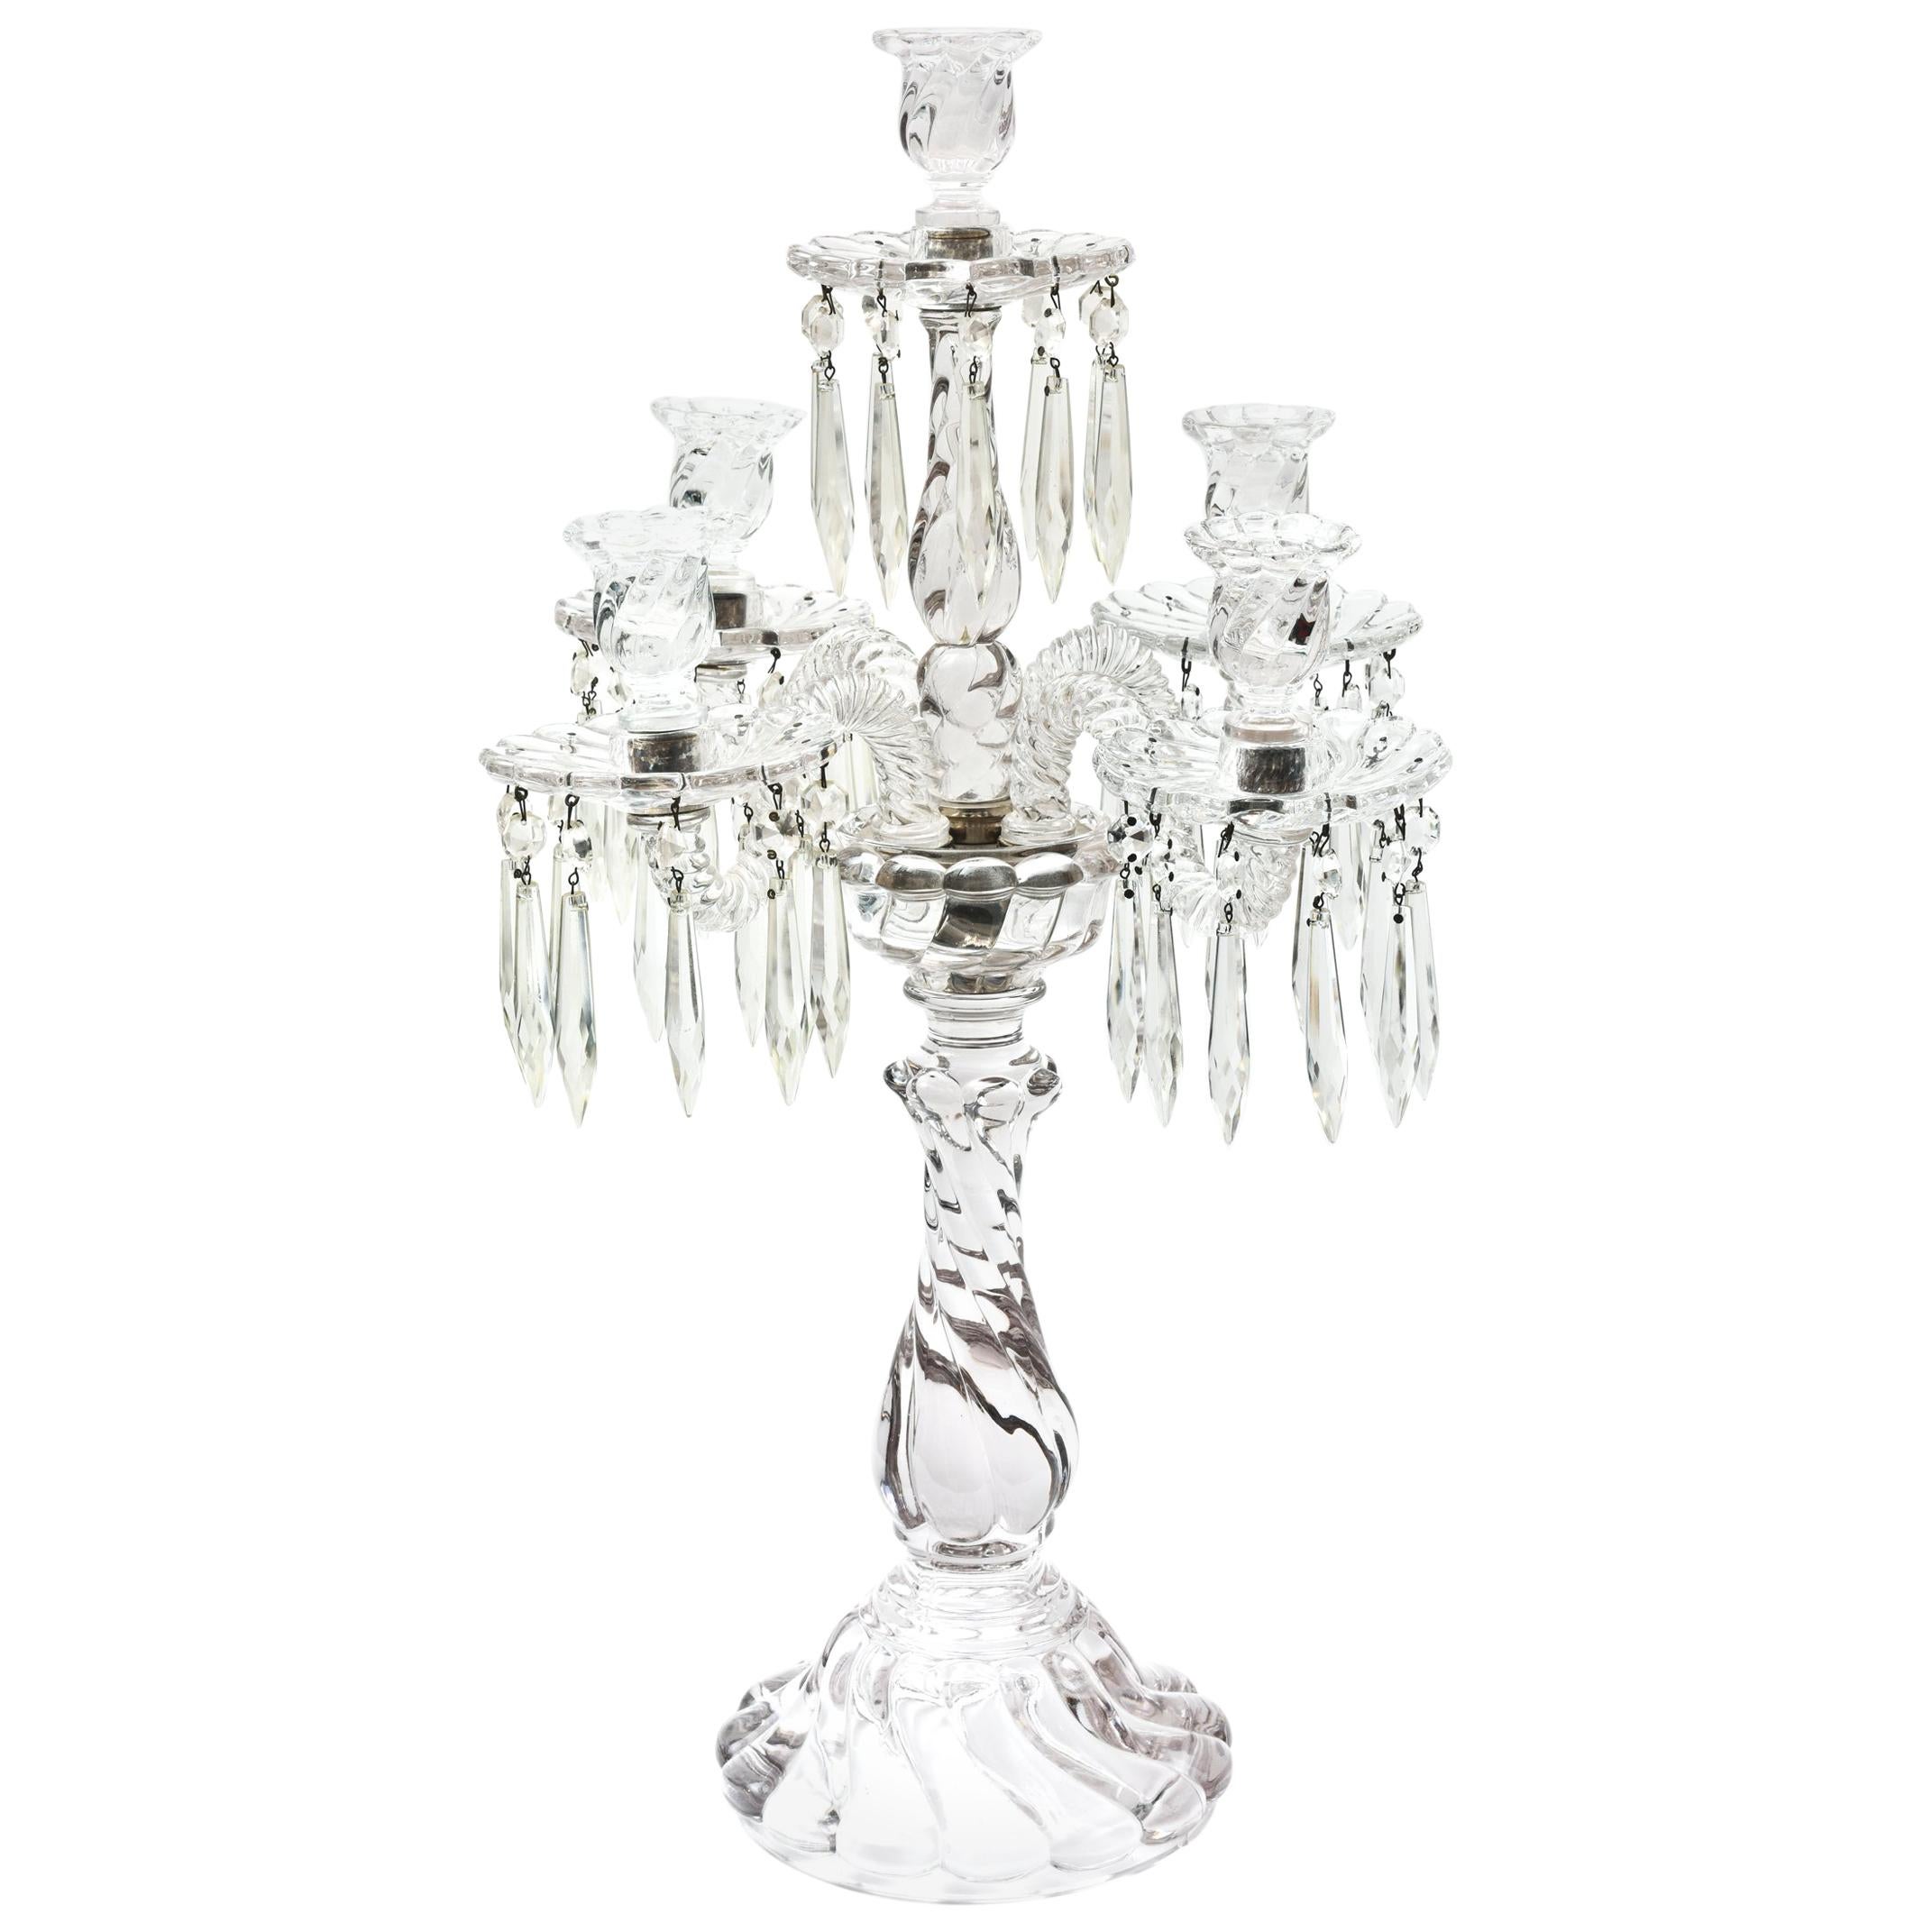 Baccarat Style Tall Crystal Candelabra, 4 Arms and Central Stem, Original Prisms